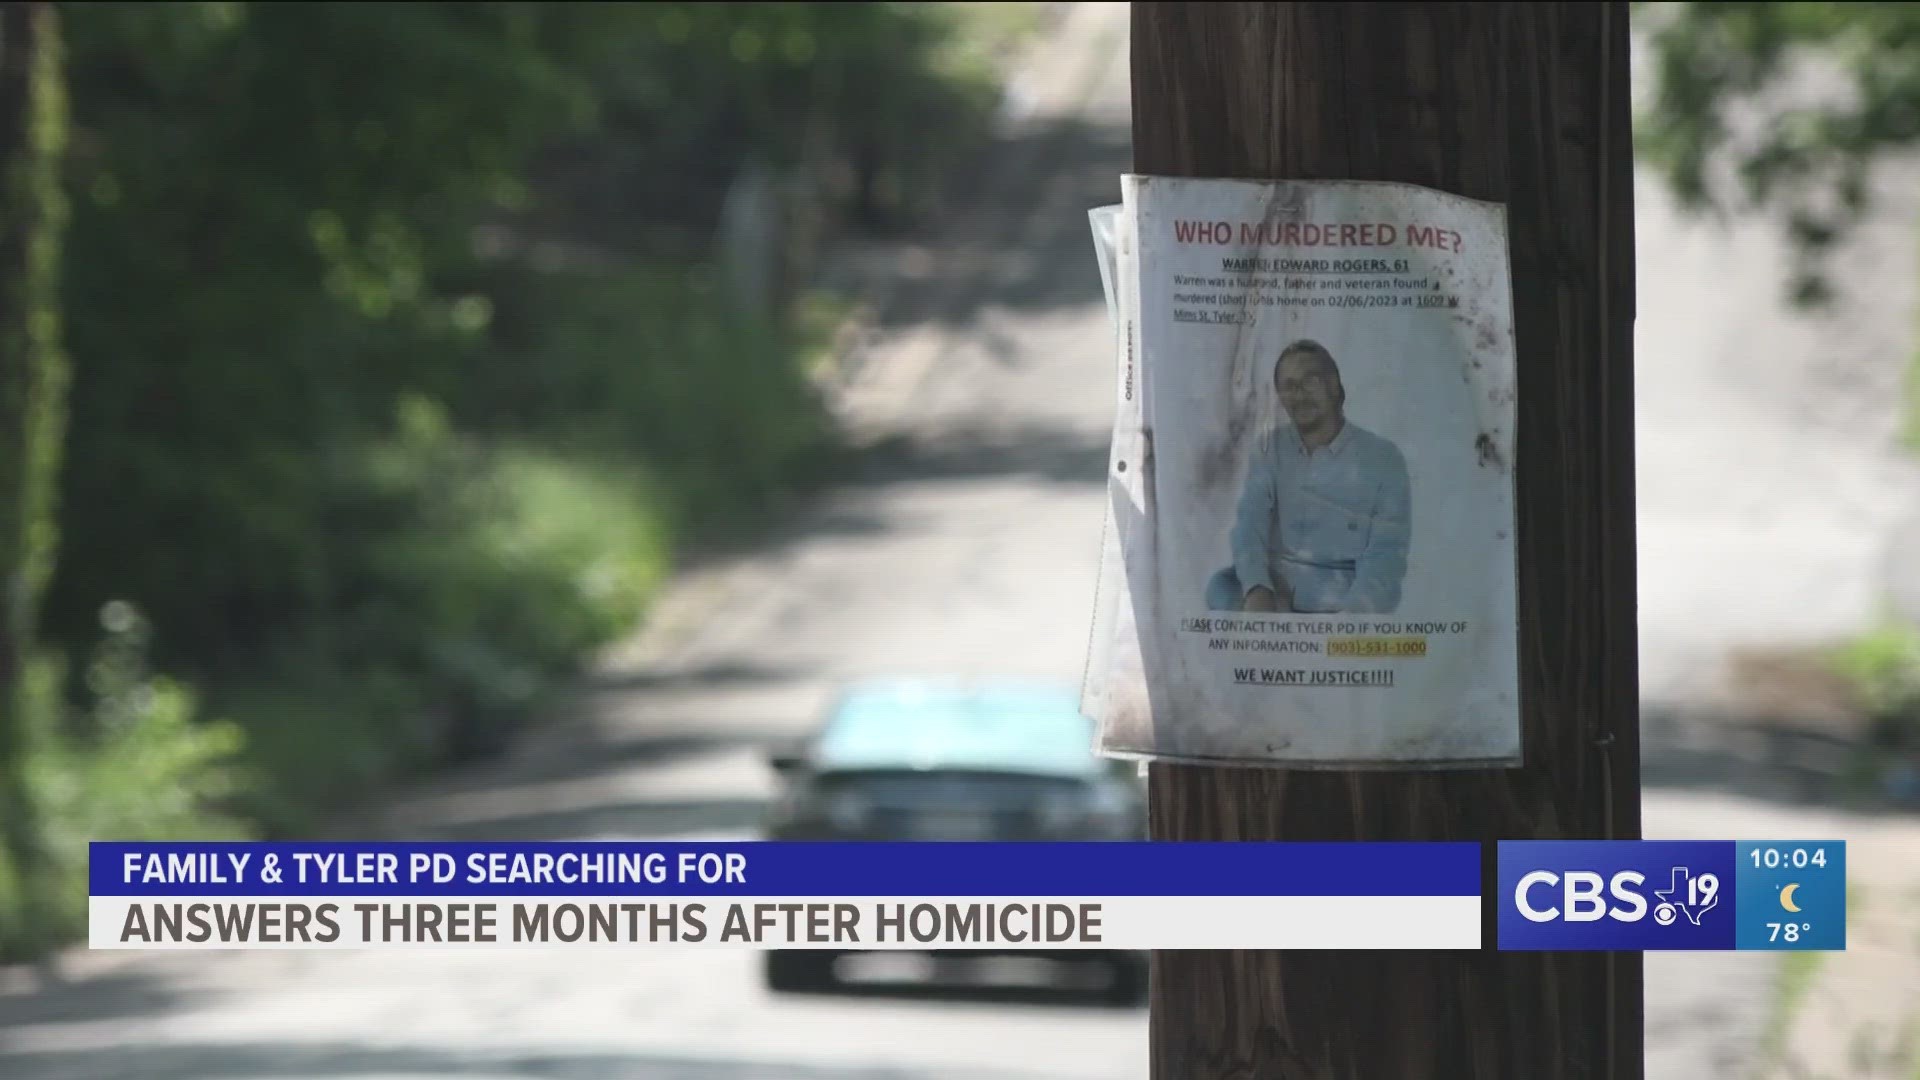 Warren Rogers was found dead in his home in February. Officials are still looking for leads so his family can have justice.